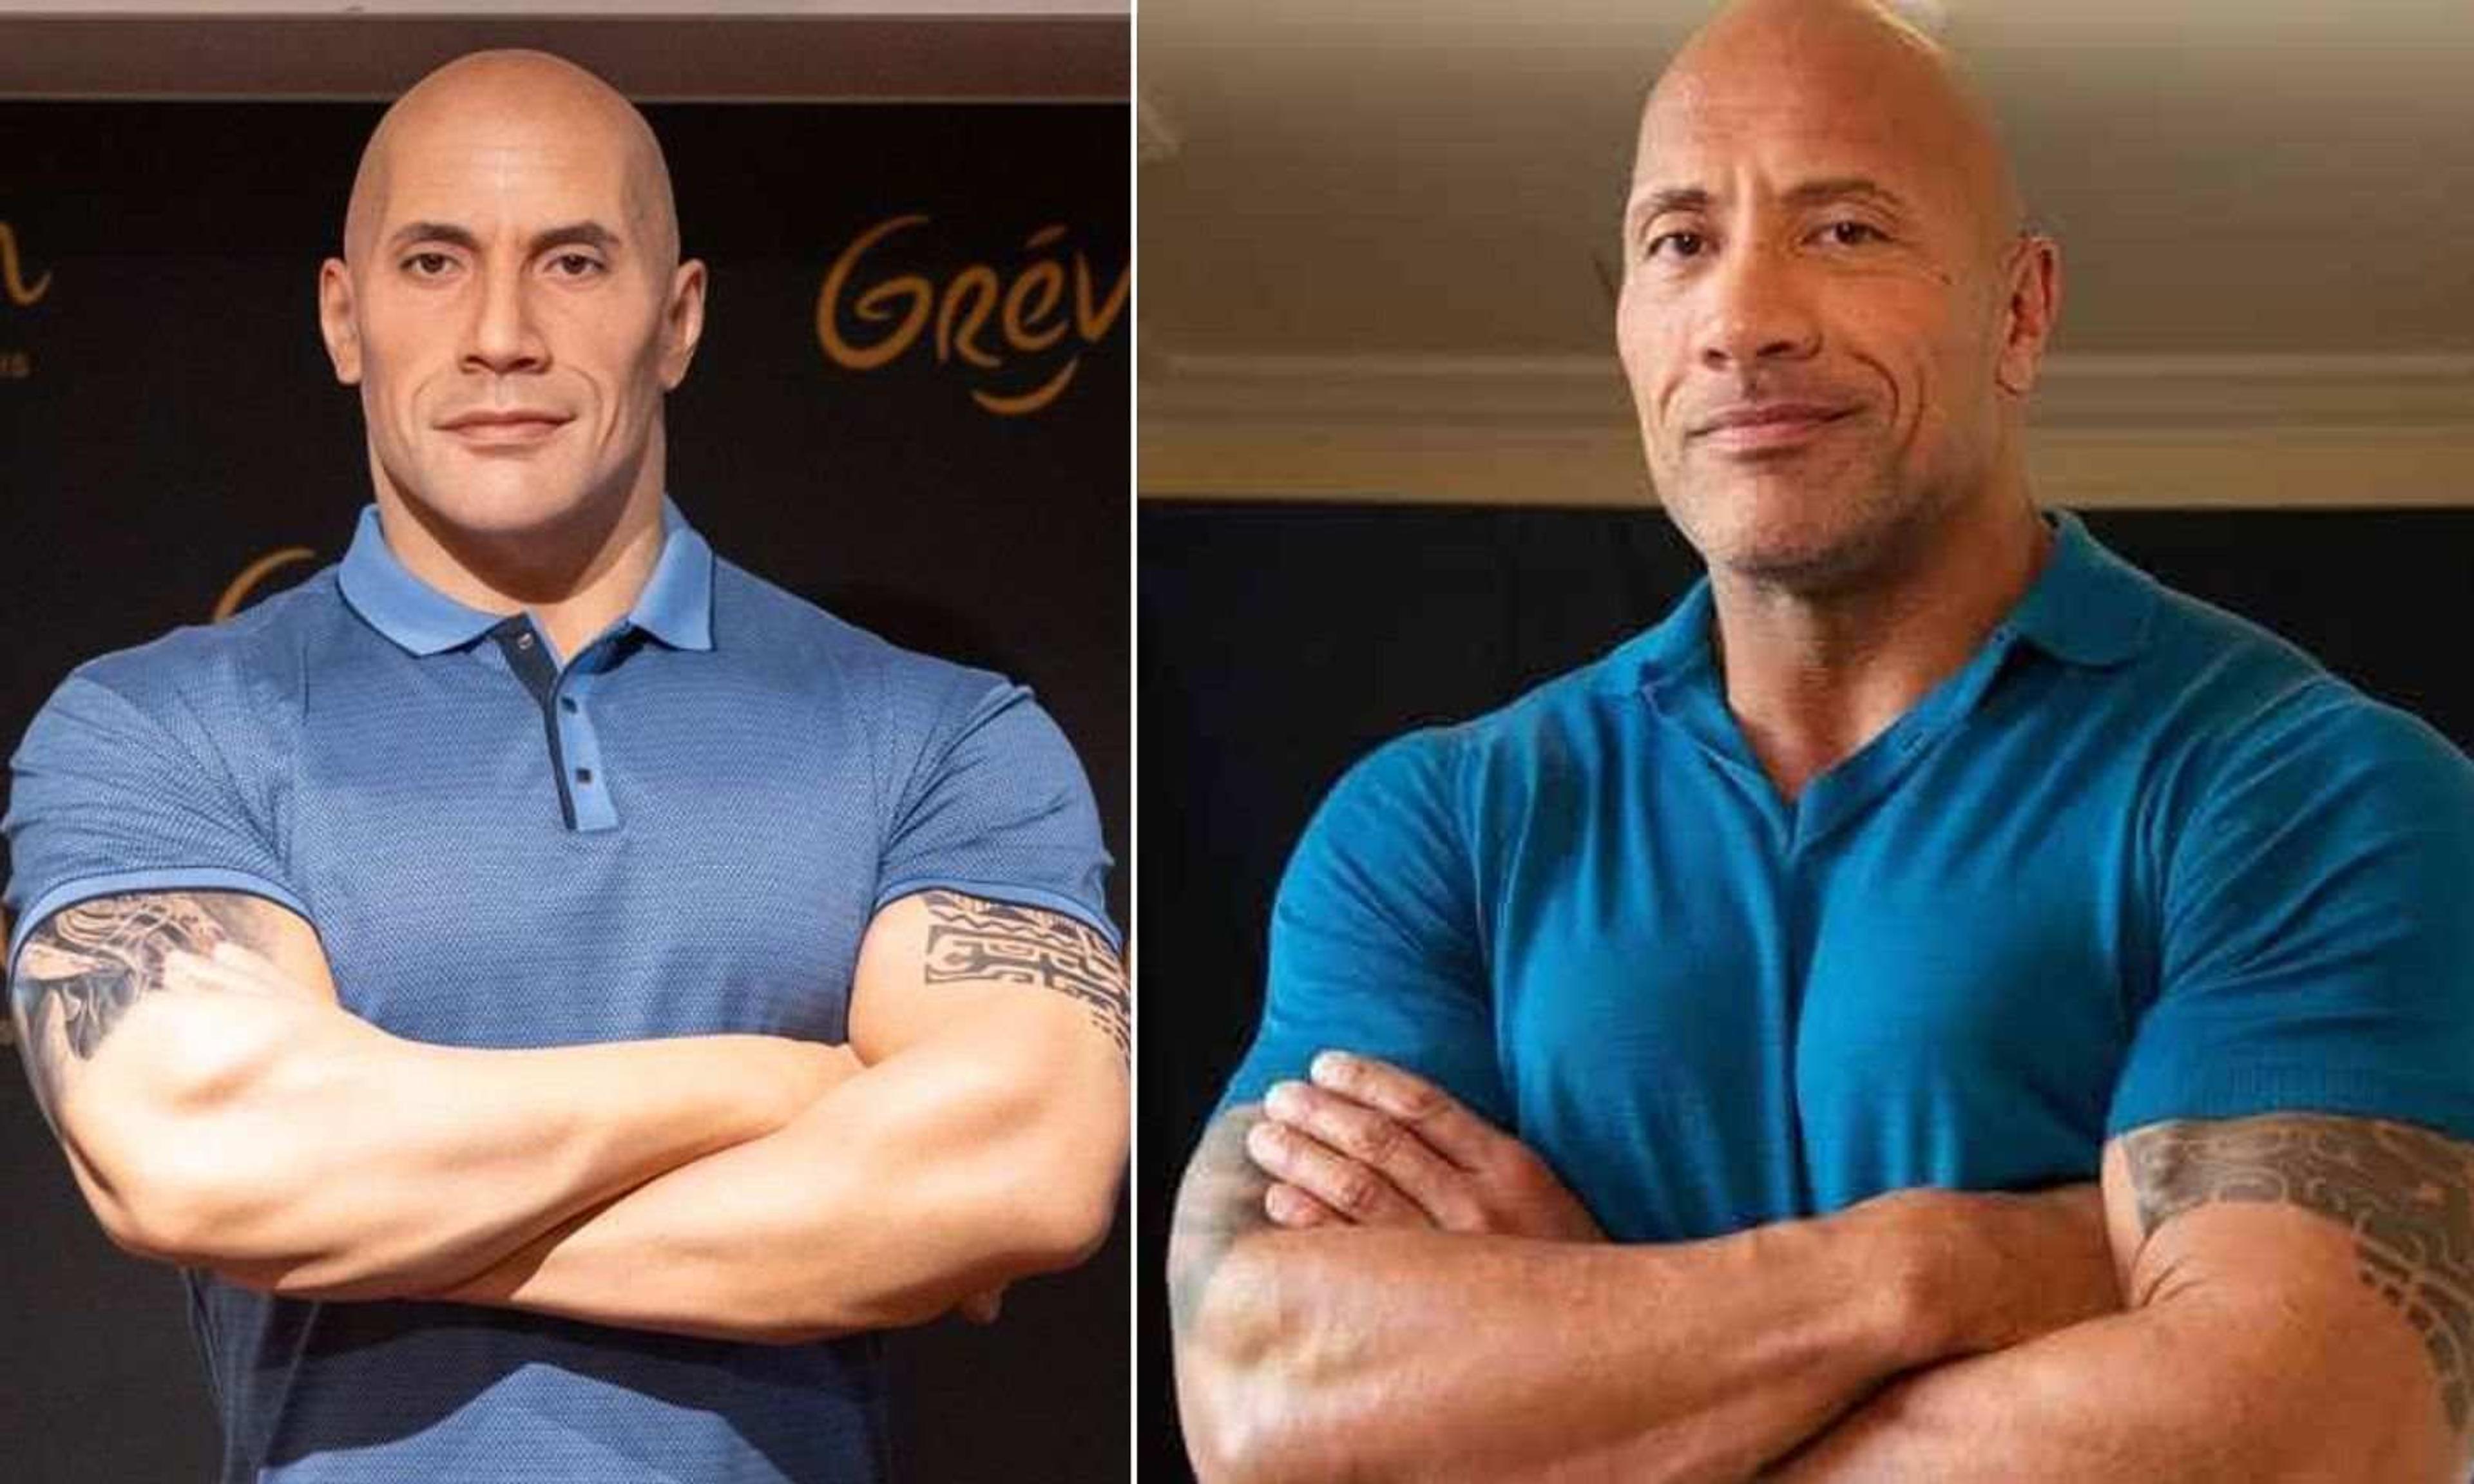 Wax statue of The Rock unveiled at Musée Grévin in Paris on 16 October.